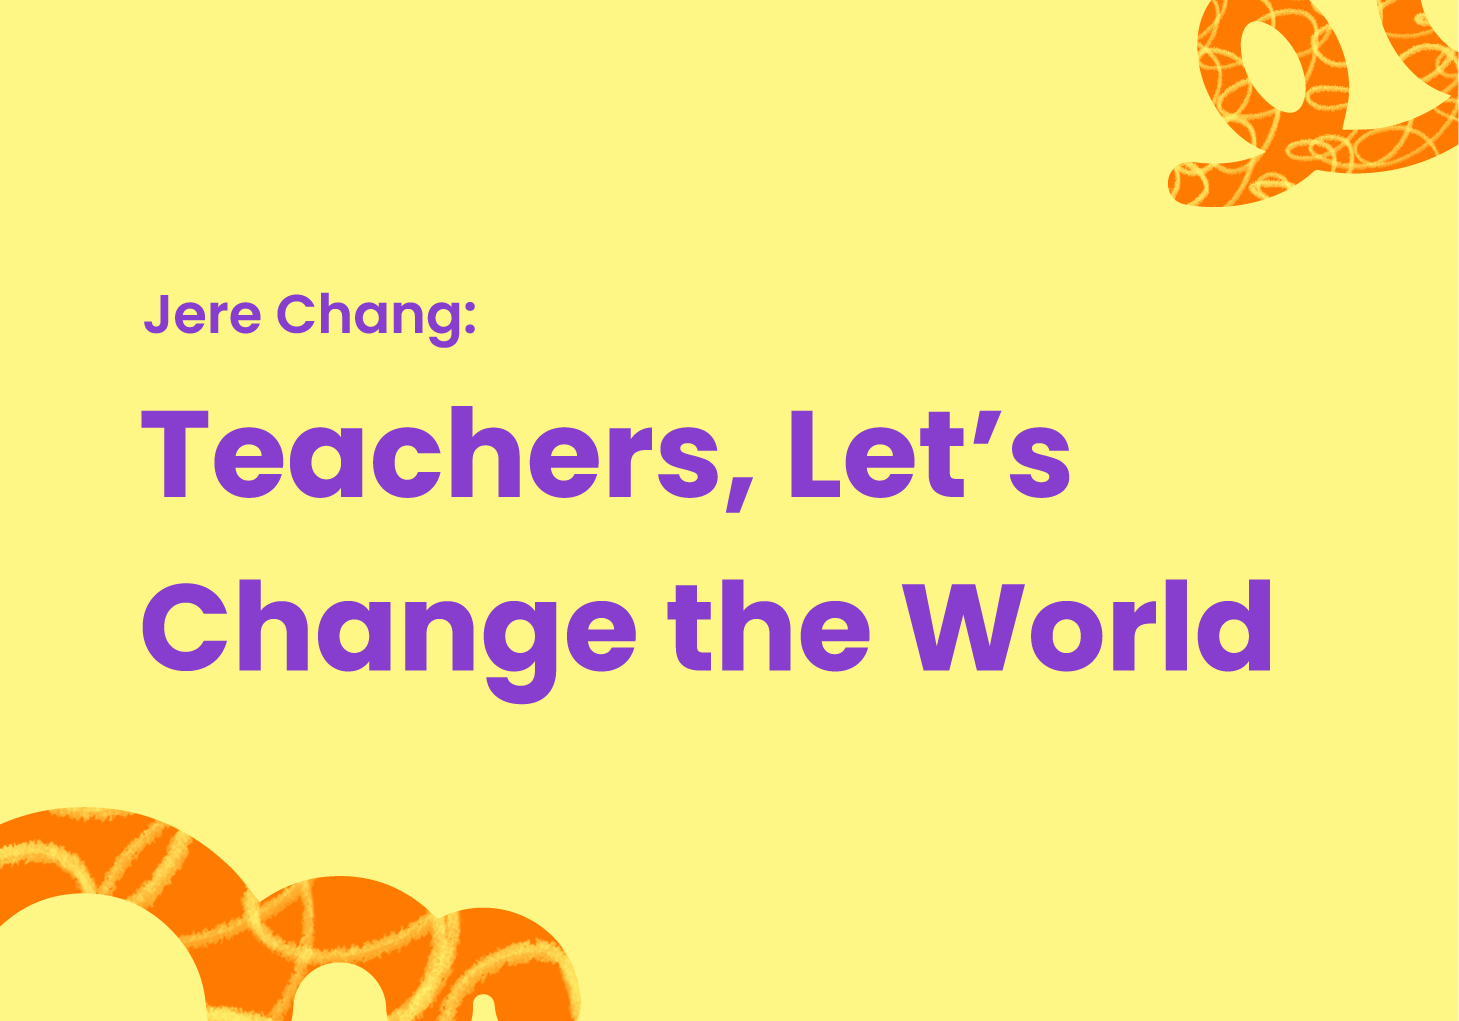 Jere Chang: Teachers, Let's Change the World